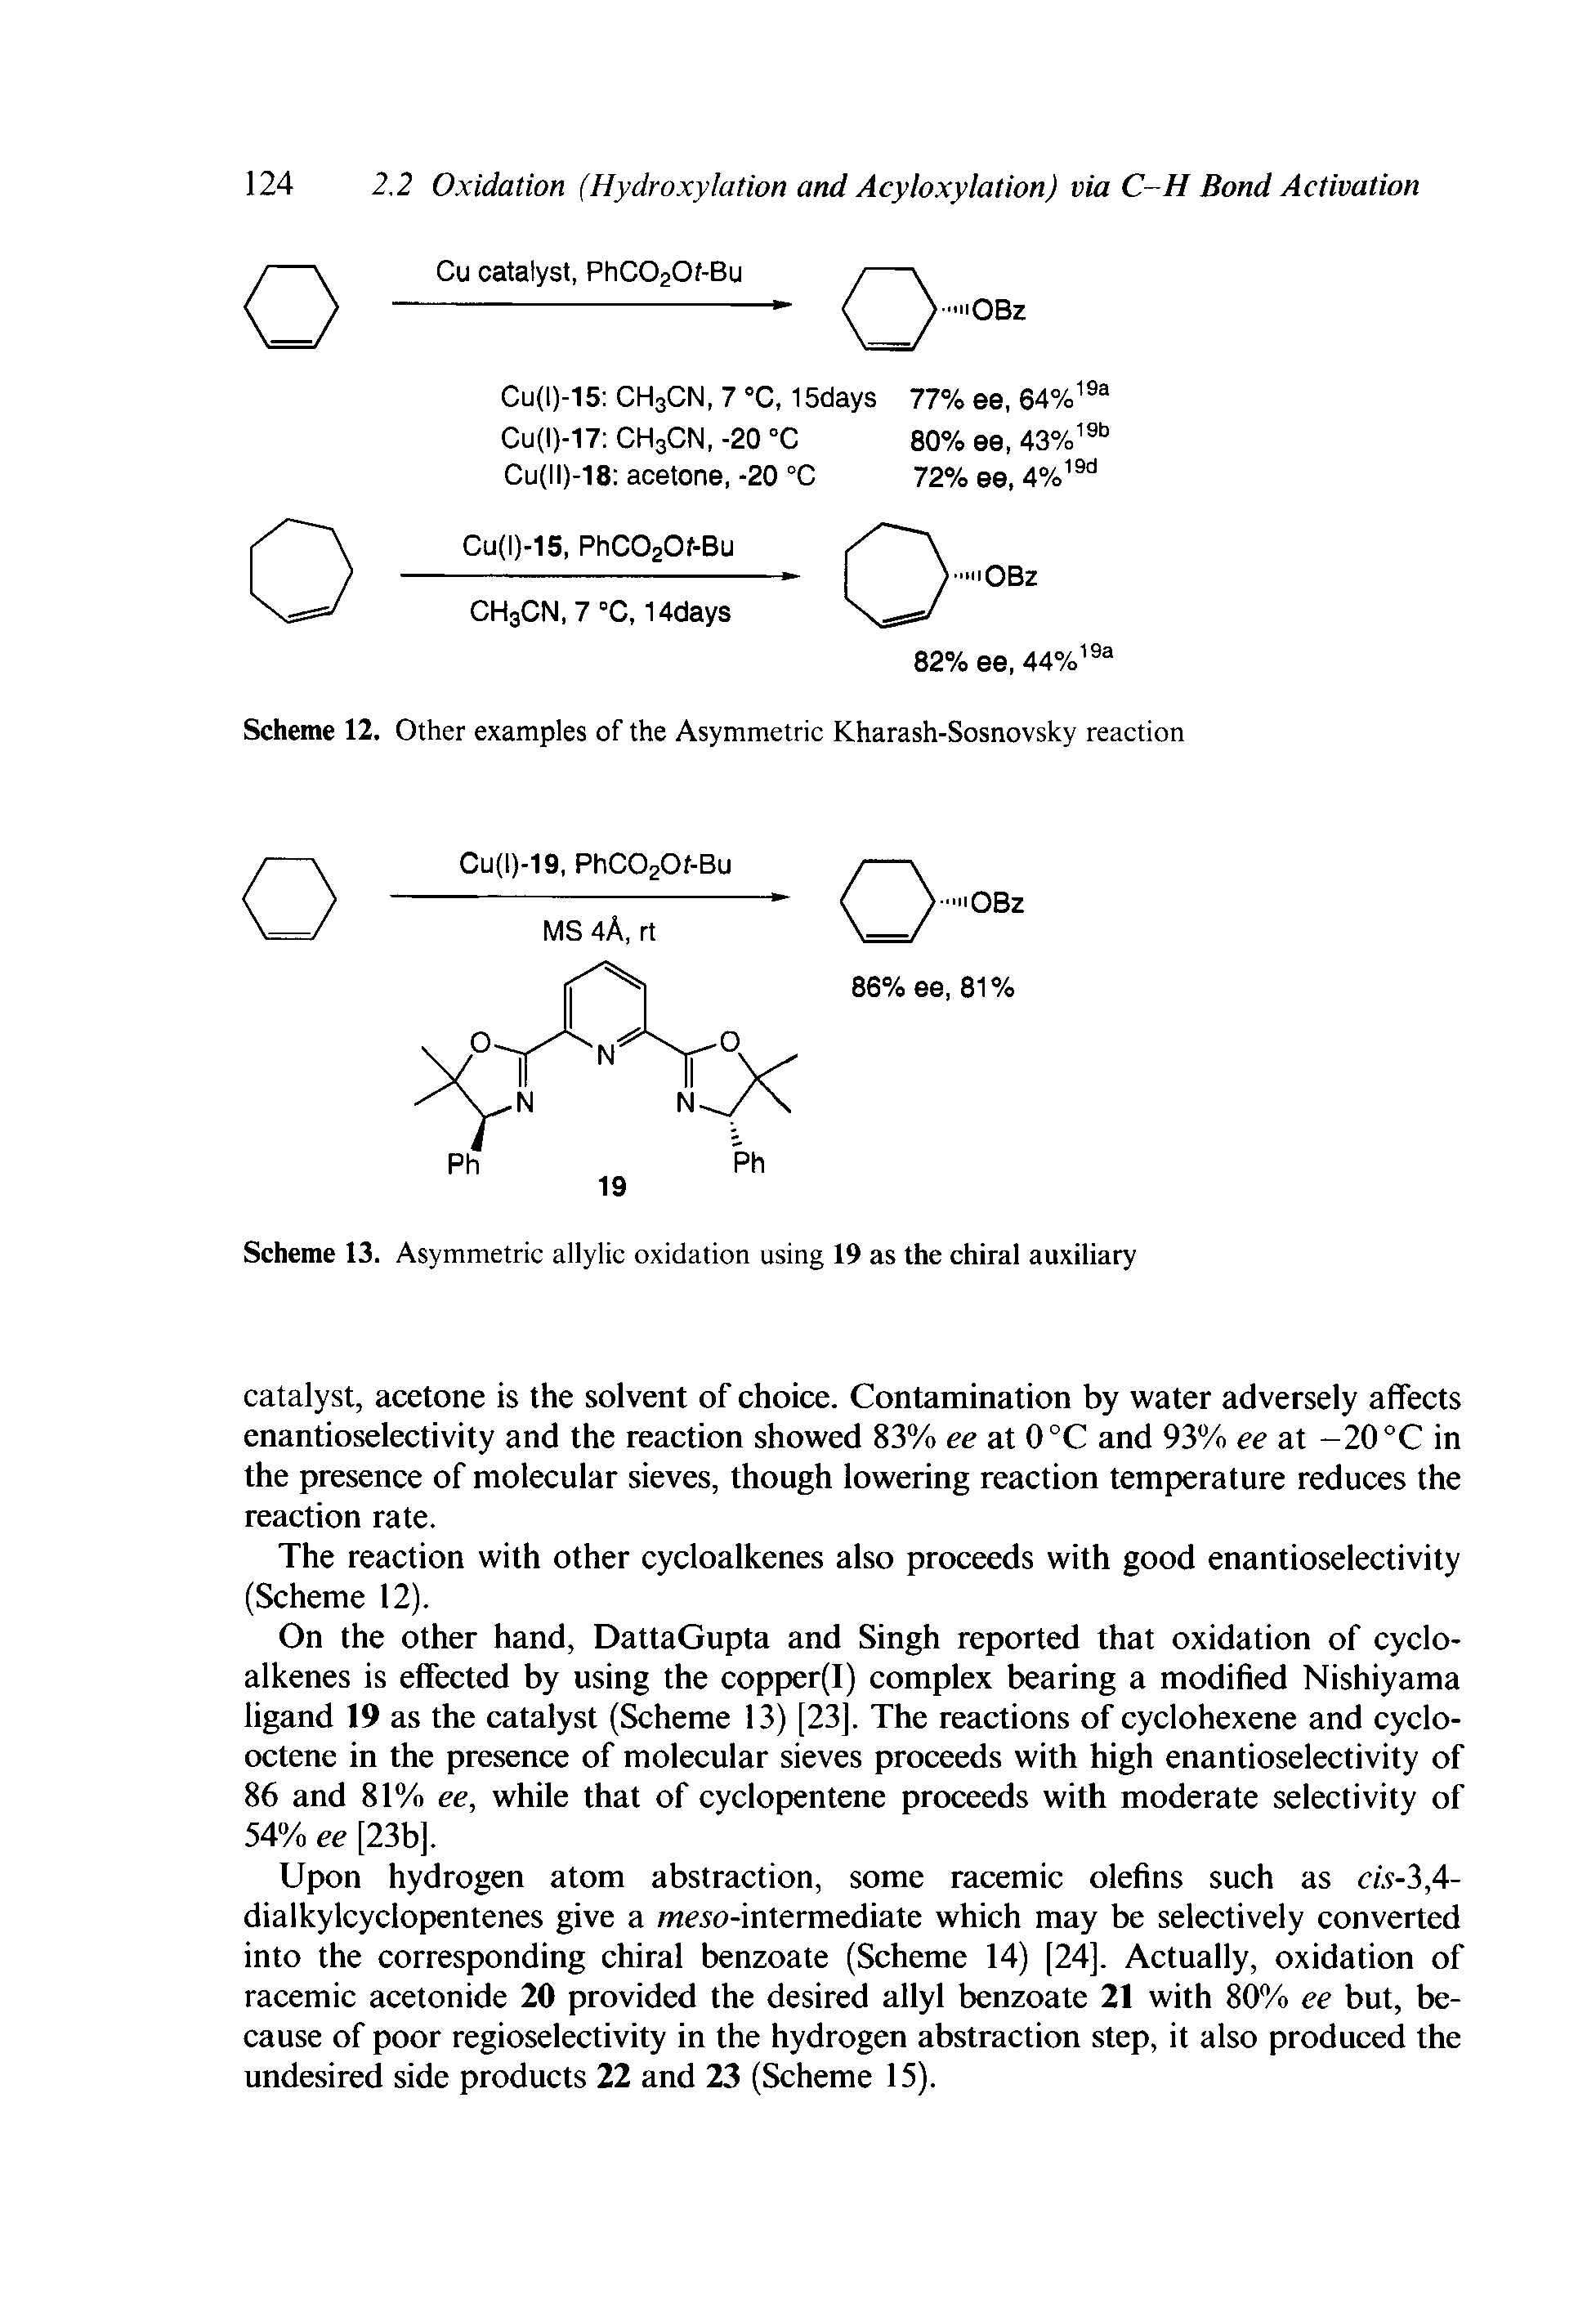 Scheme 13. Asymmetric allylic oxidation using 19 as the chiral auxiliary...